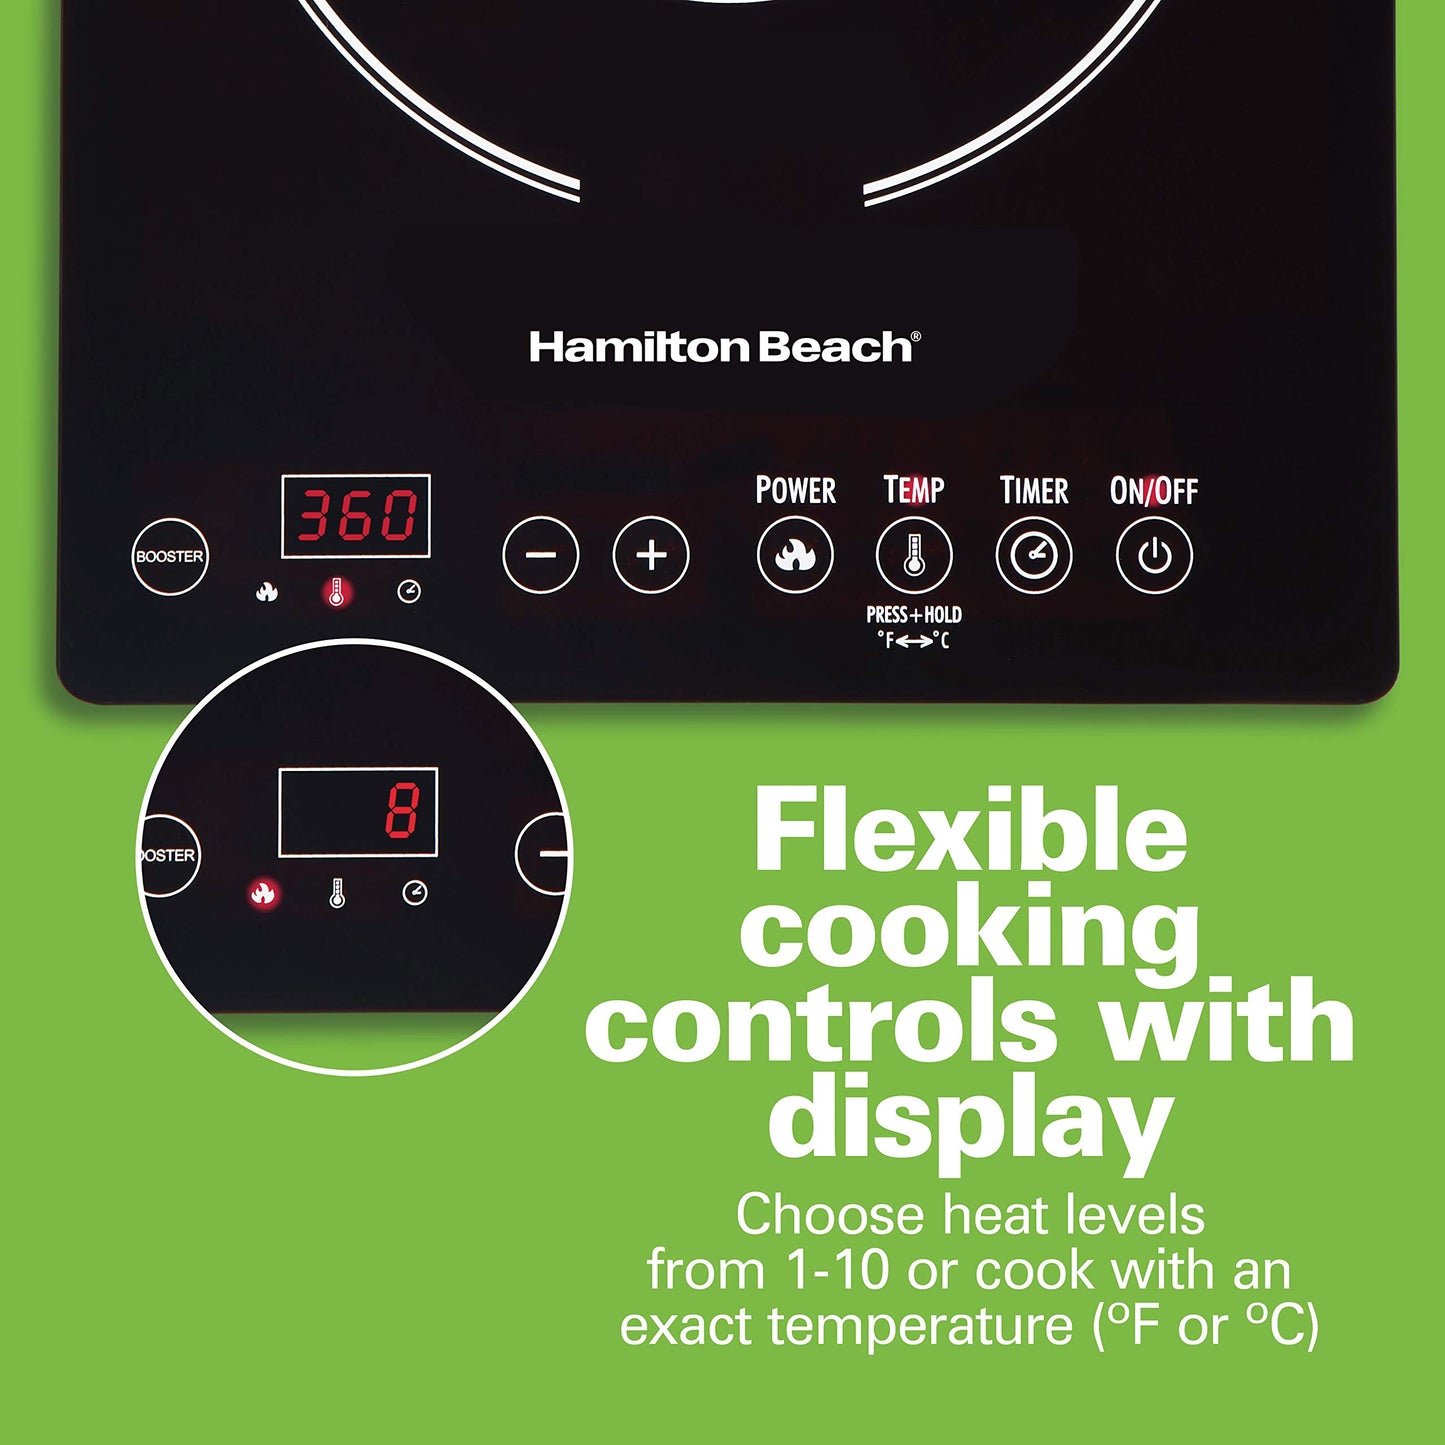 Hamilton Beach Portable Single Induction Cooktop Countertop Burner Hot Plate with Fast Heating Mode, 1800 Watts